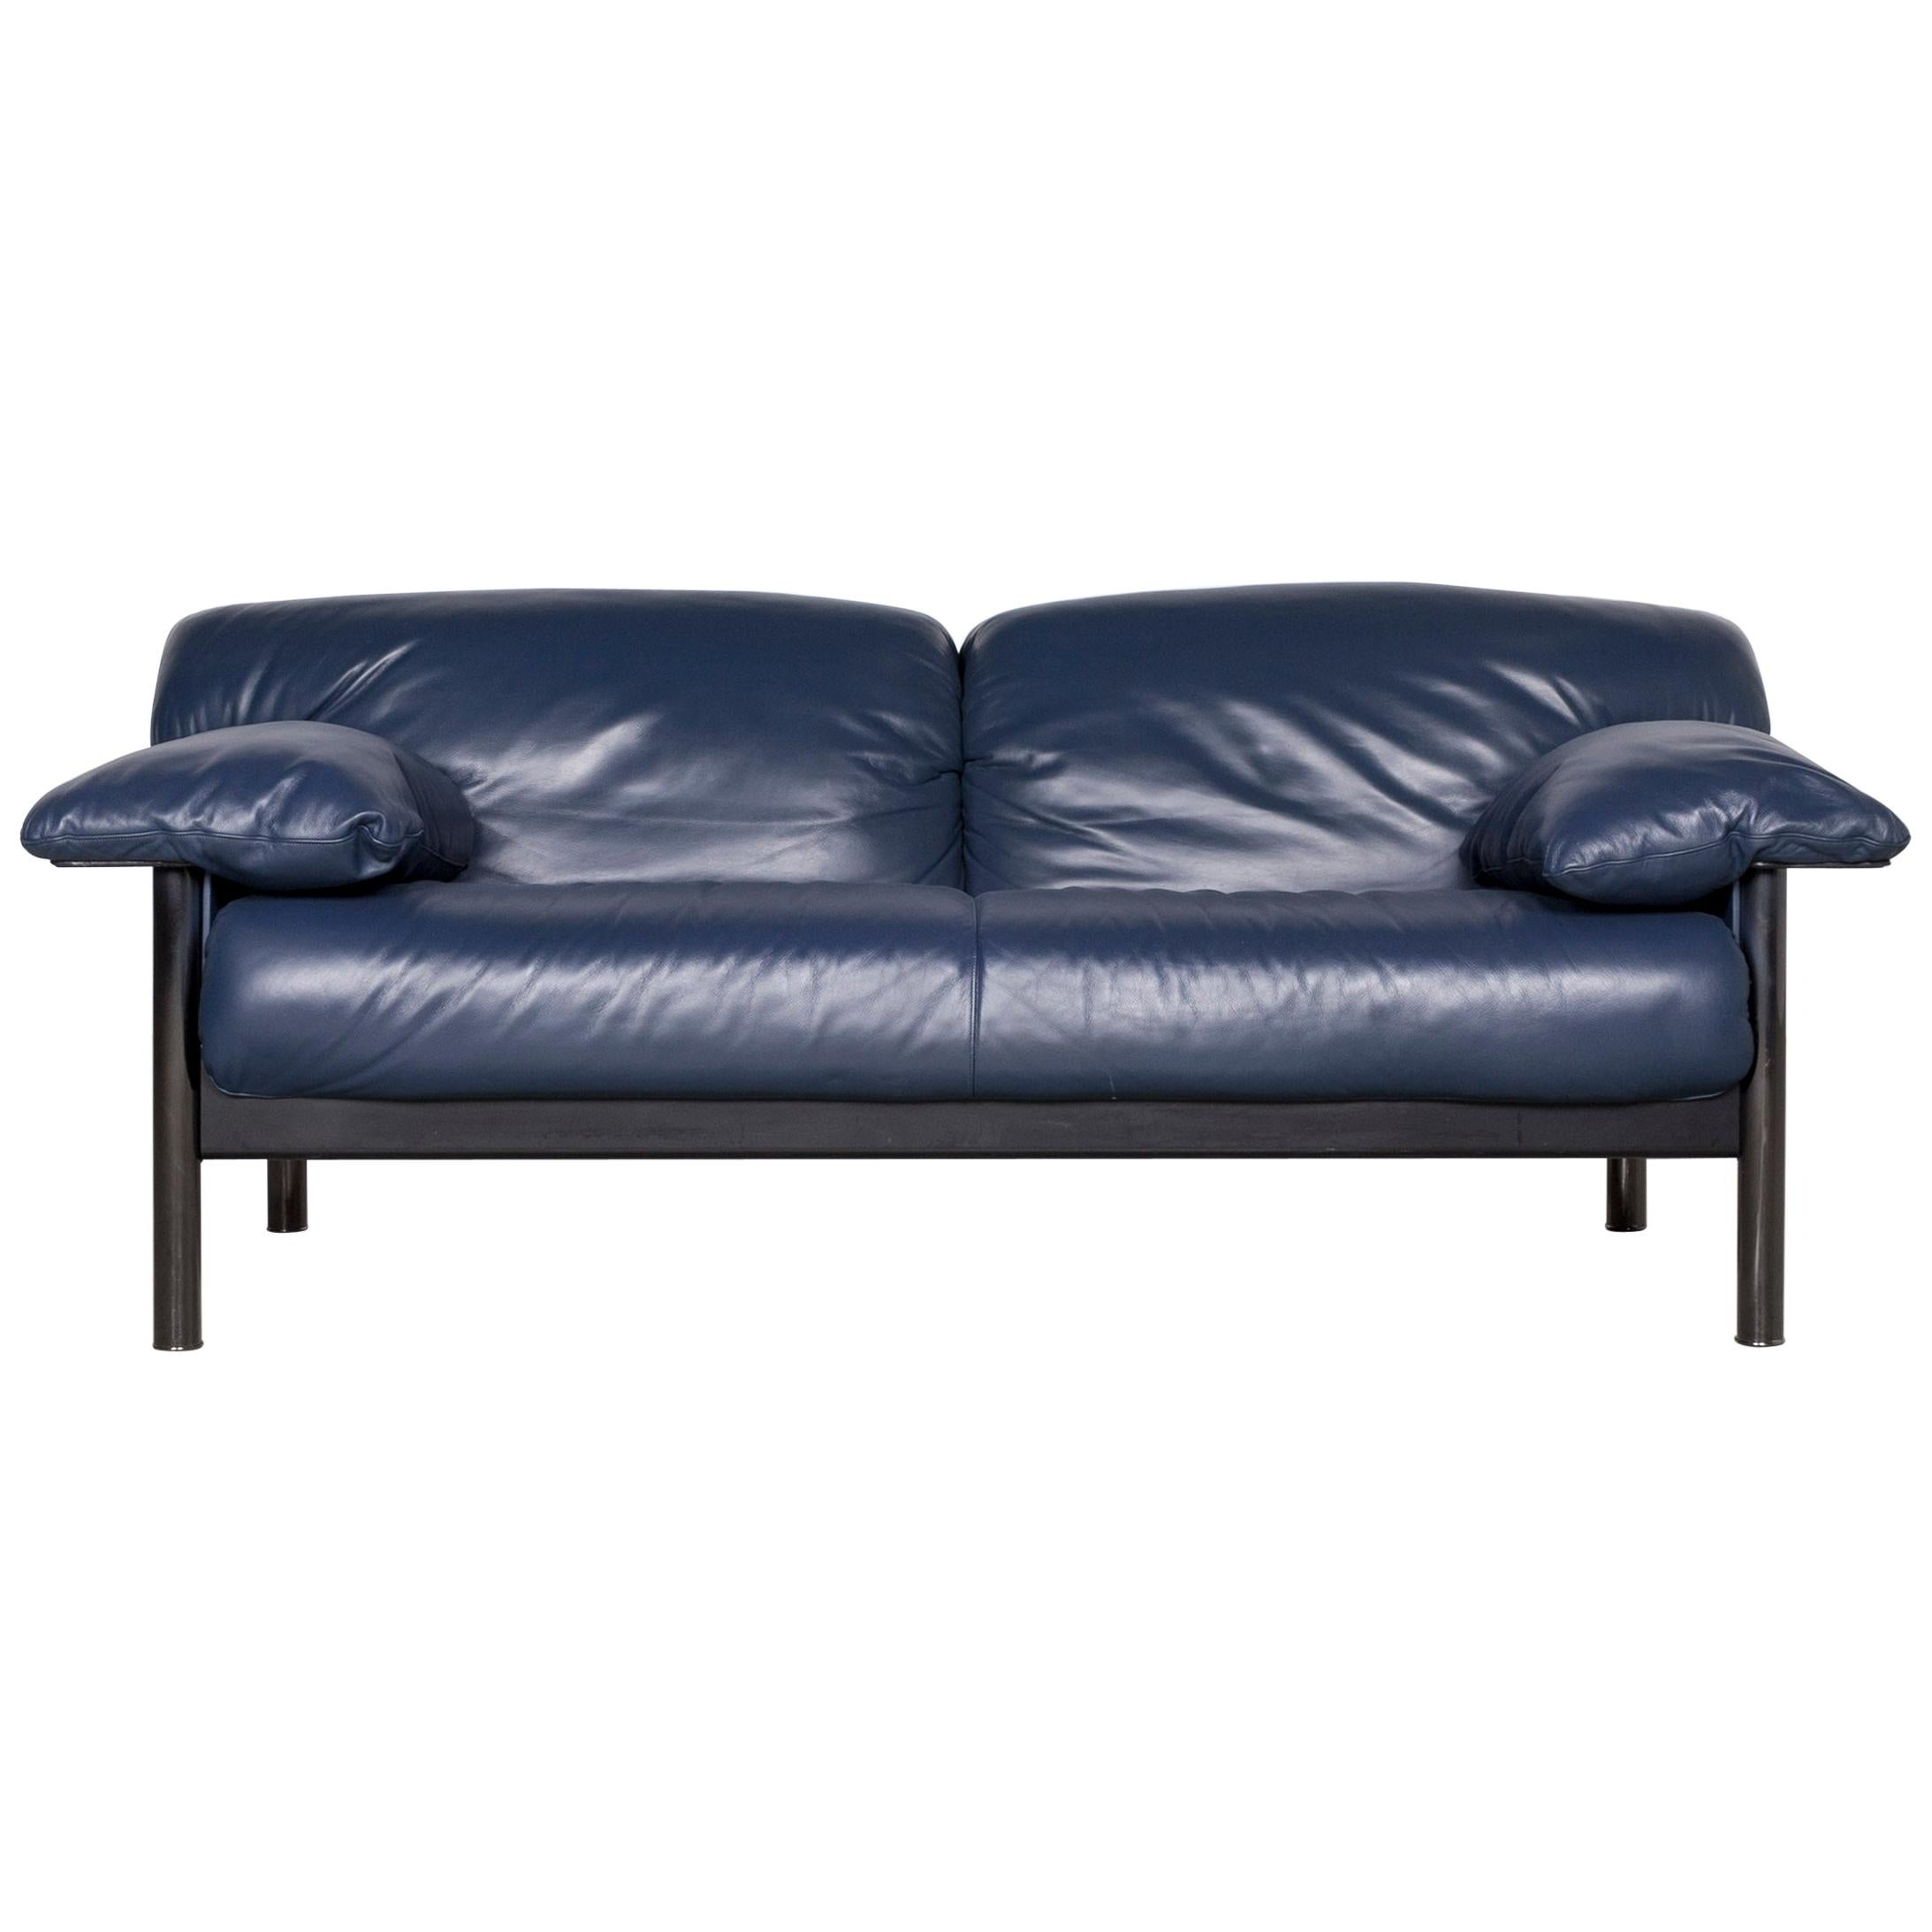 Poltrona Frau Designer Leather Sofa Blue Genuine Leather Two-Seat Couch